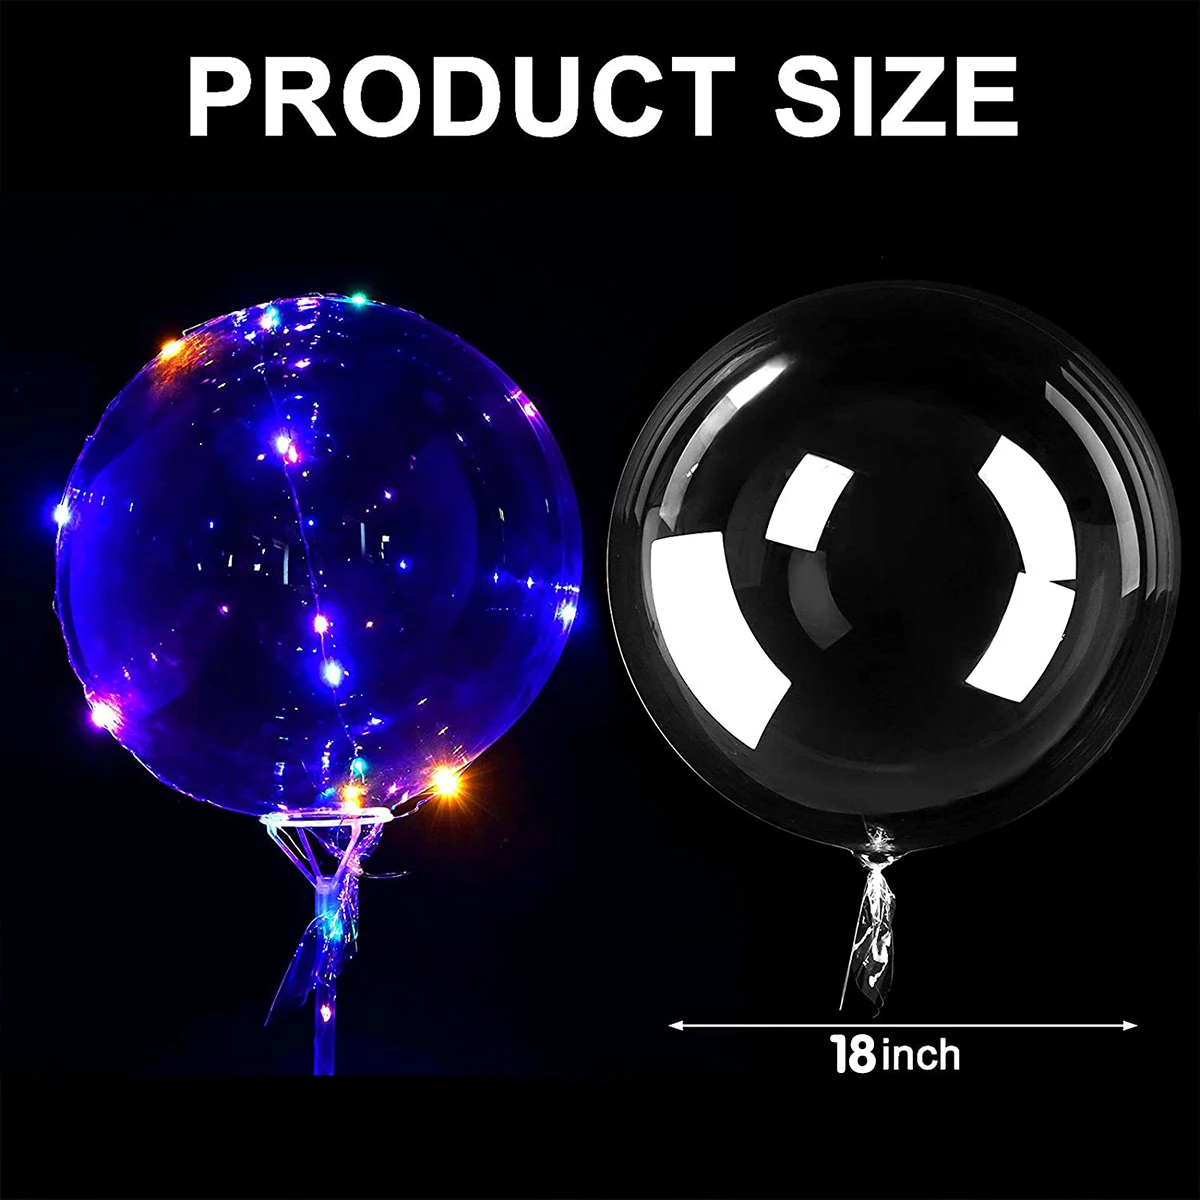 Led Bobo Balloons with Stick Transparent Light Up Bubble Balloons with String Light for Party Birthday Wedding Festival Decor images - 6